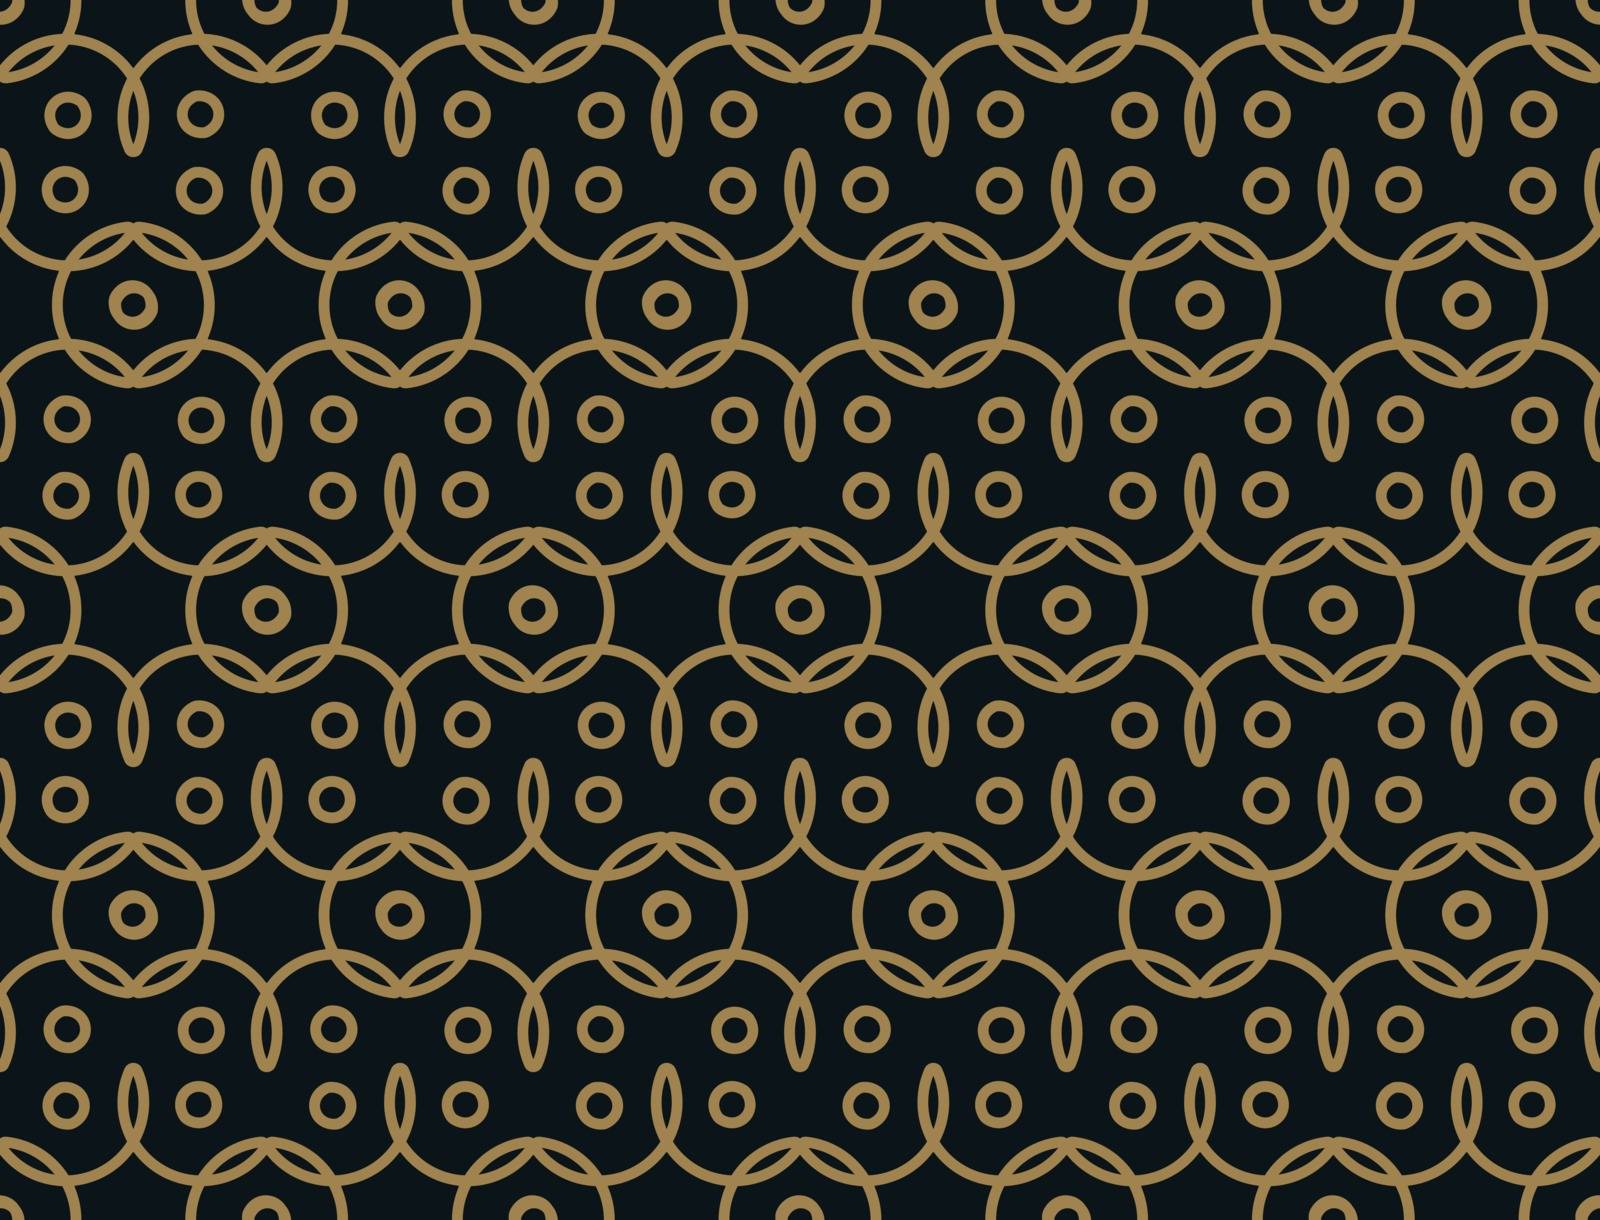 Seamless linear pattern with thin elegant curved lines and scrolls forming floral ornamental wallpaper. Abstract texture on gold black backdrop.